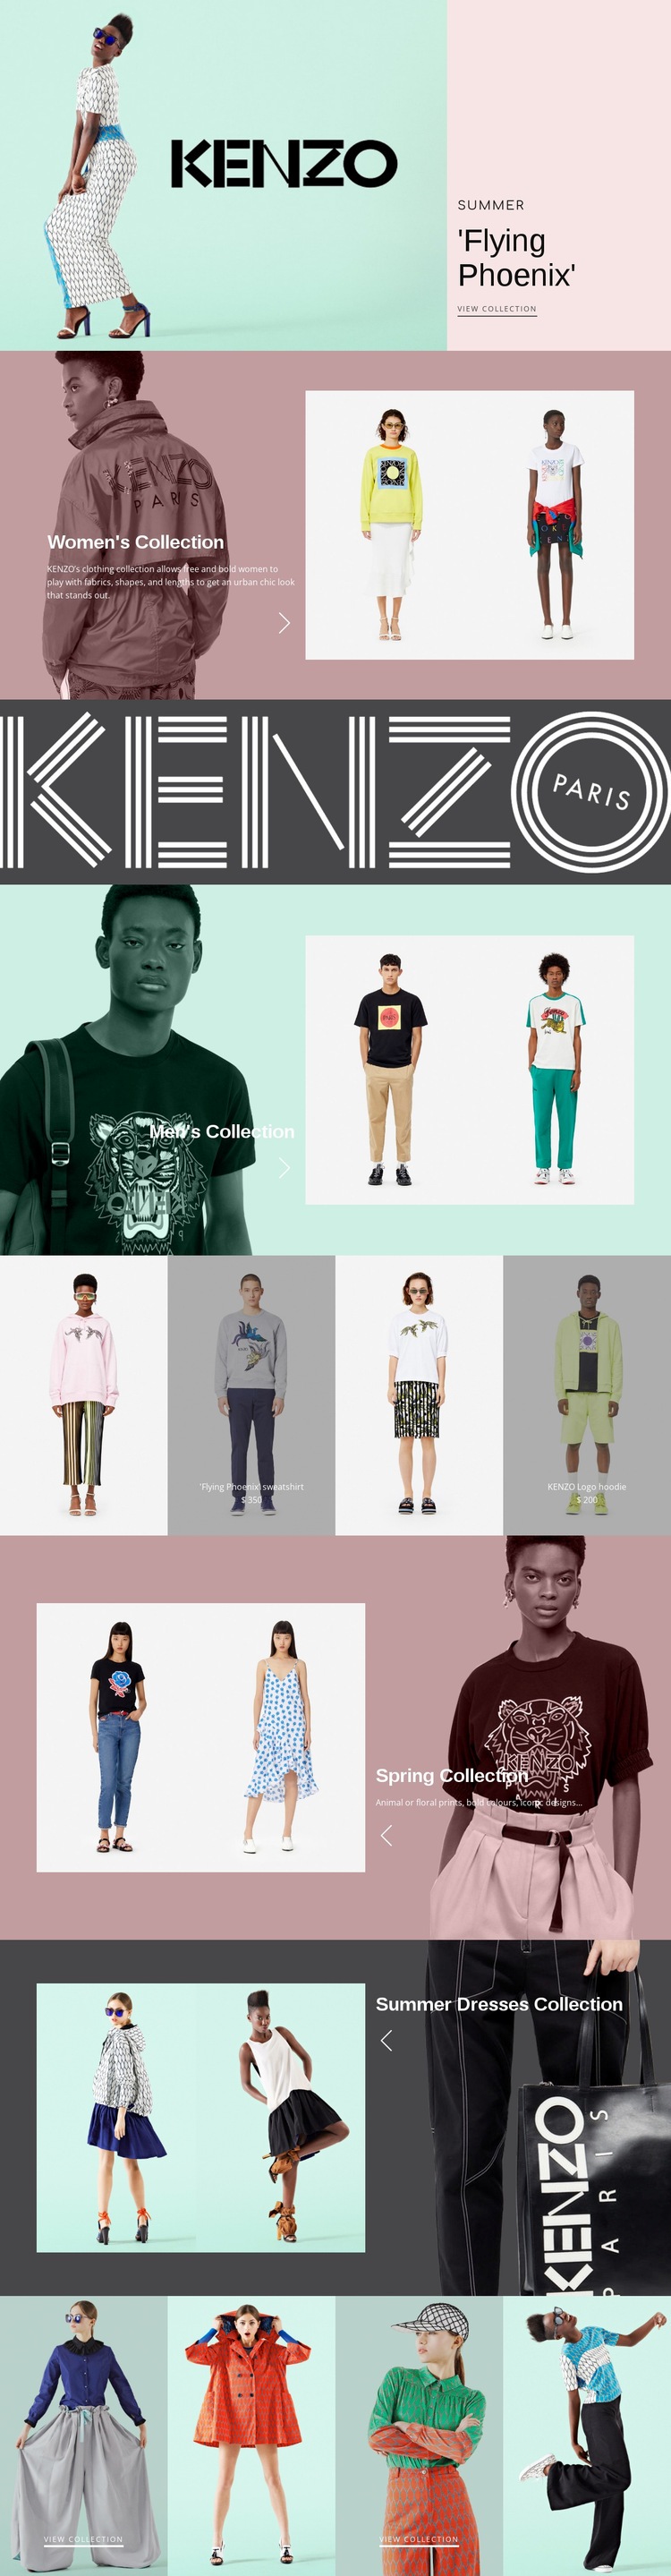 Atelier of modern fashion Html Code Example